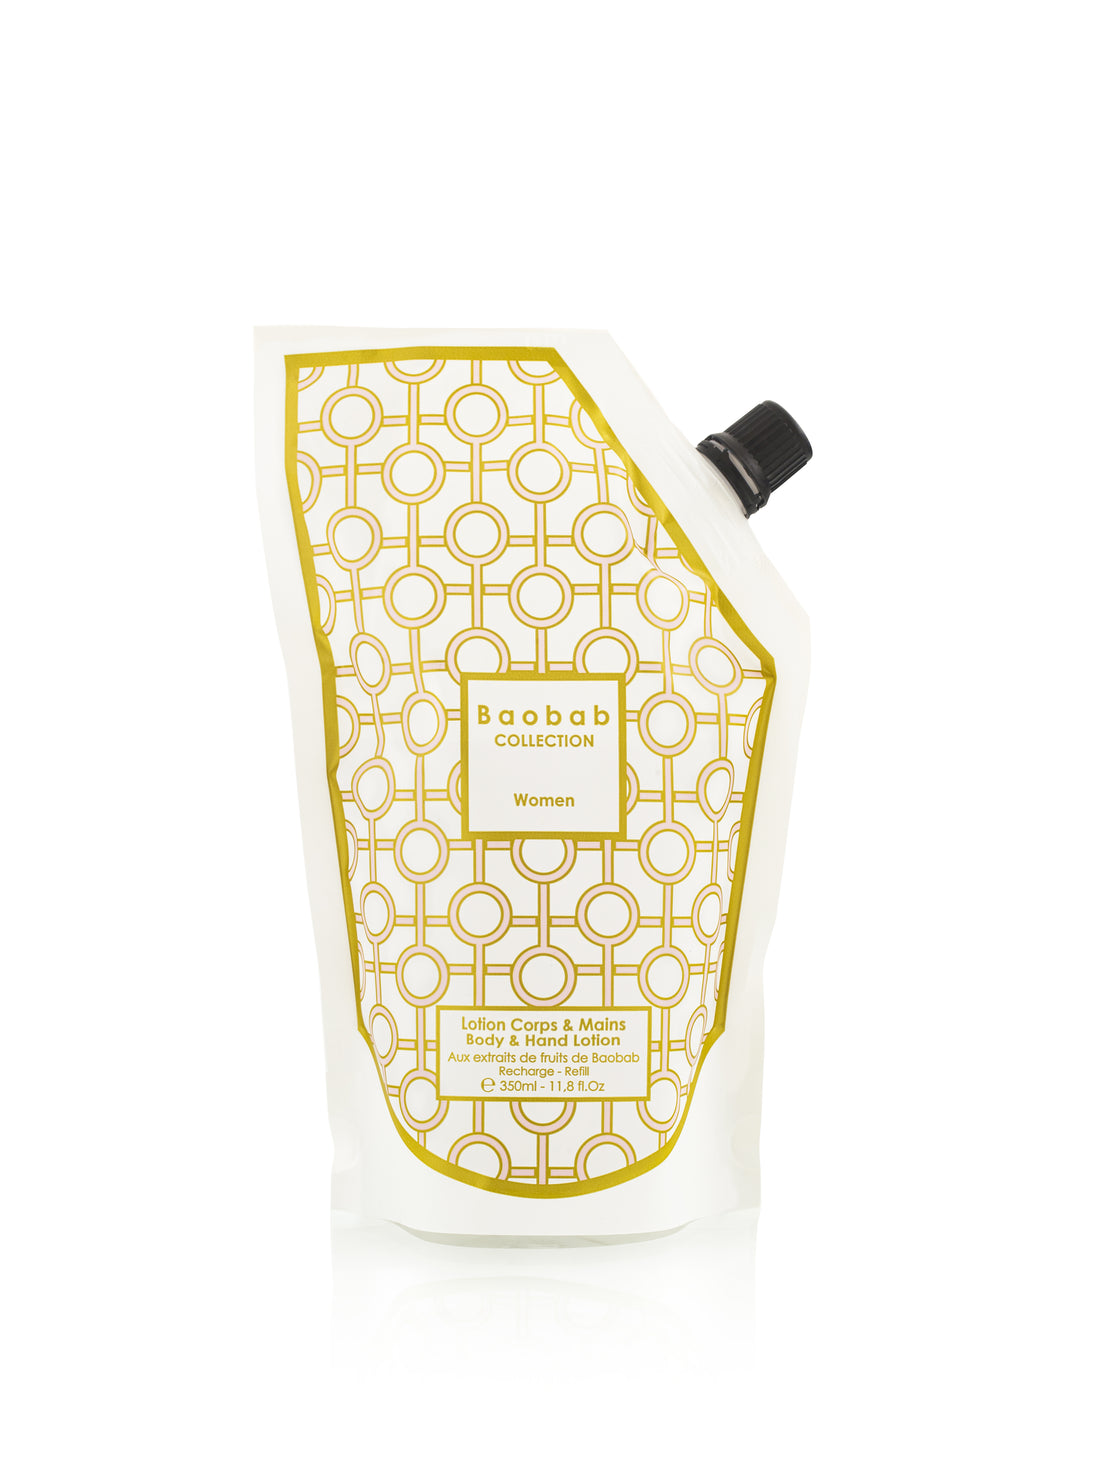 REFILL BODY & HAND LOTION WOMEN - Baobab Collection